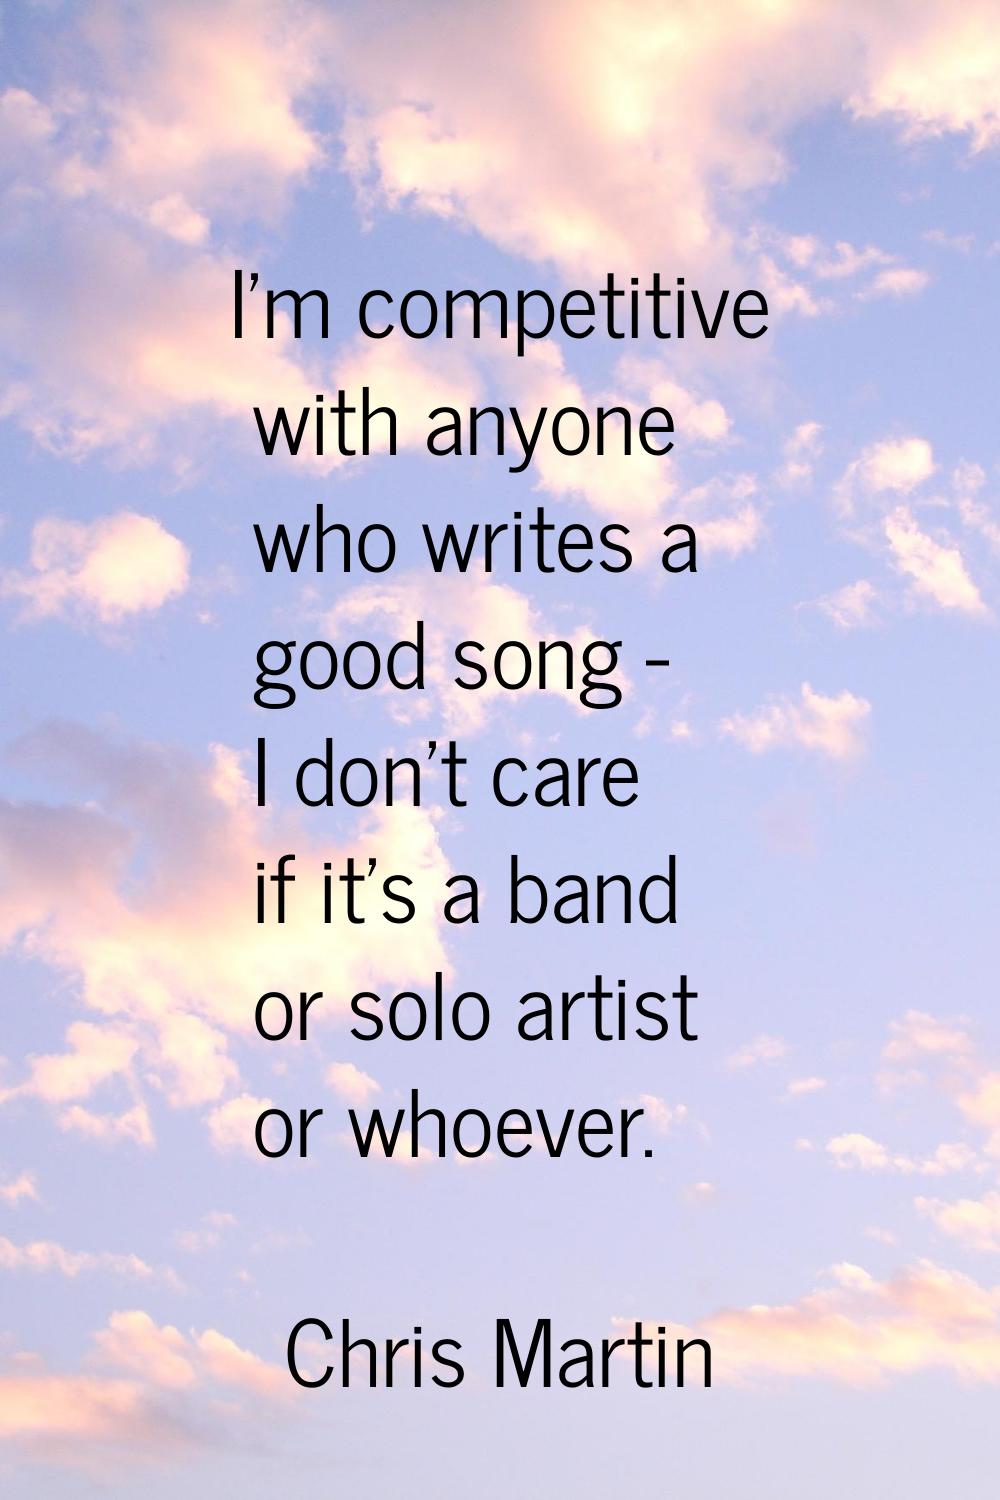 I'm competitive with anyone who writes a good song - I don't care if it's a band or solo artist or 